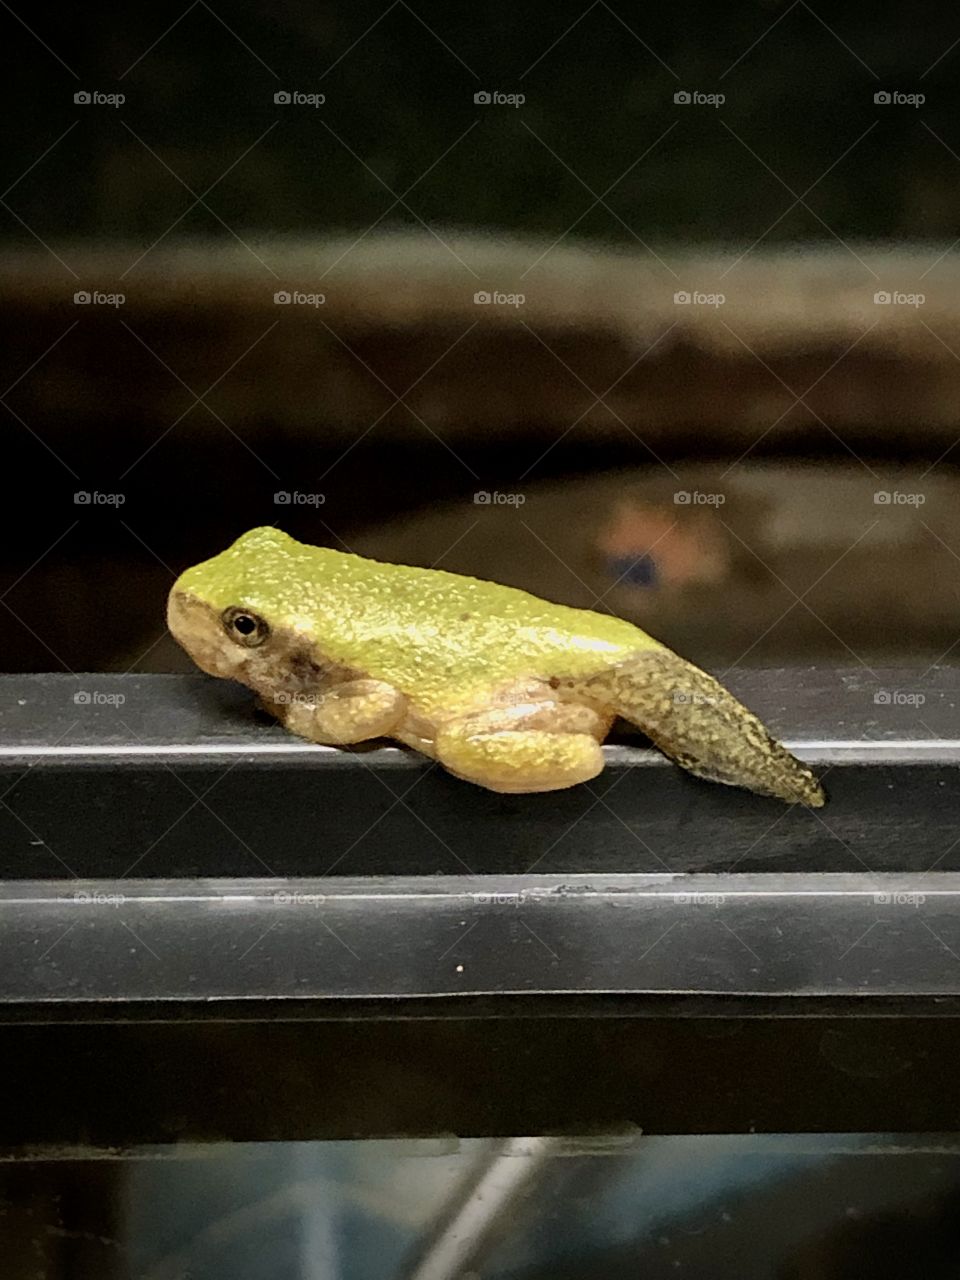 Young Frog with a Tail